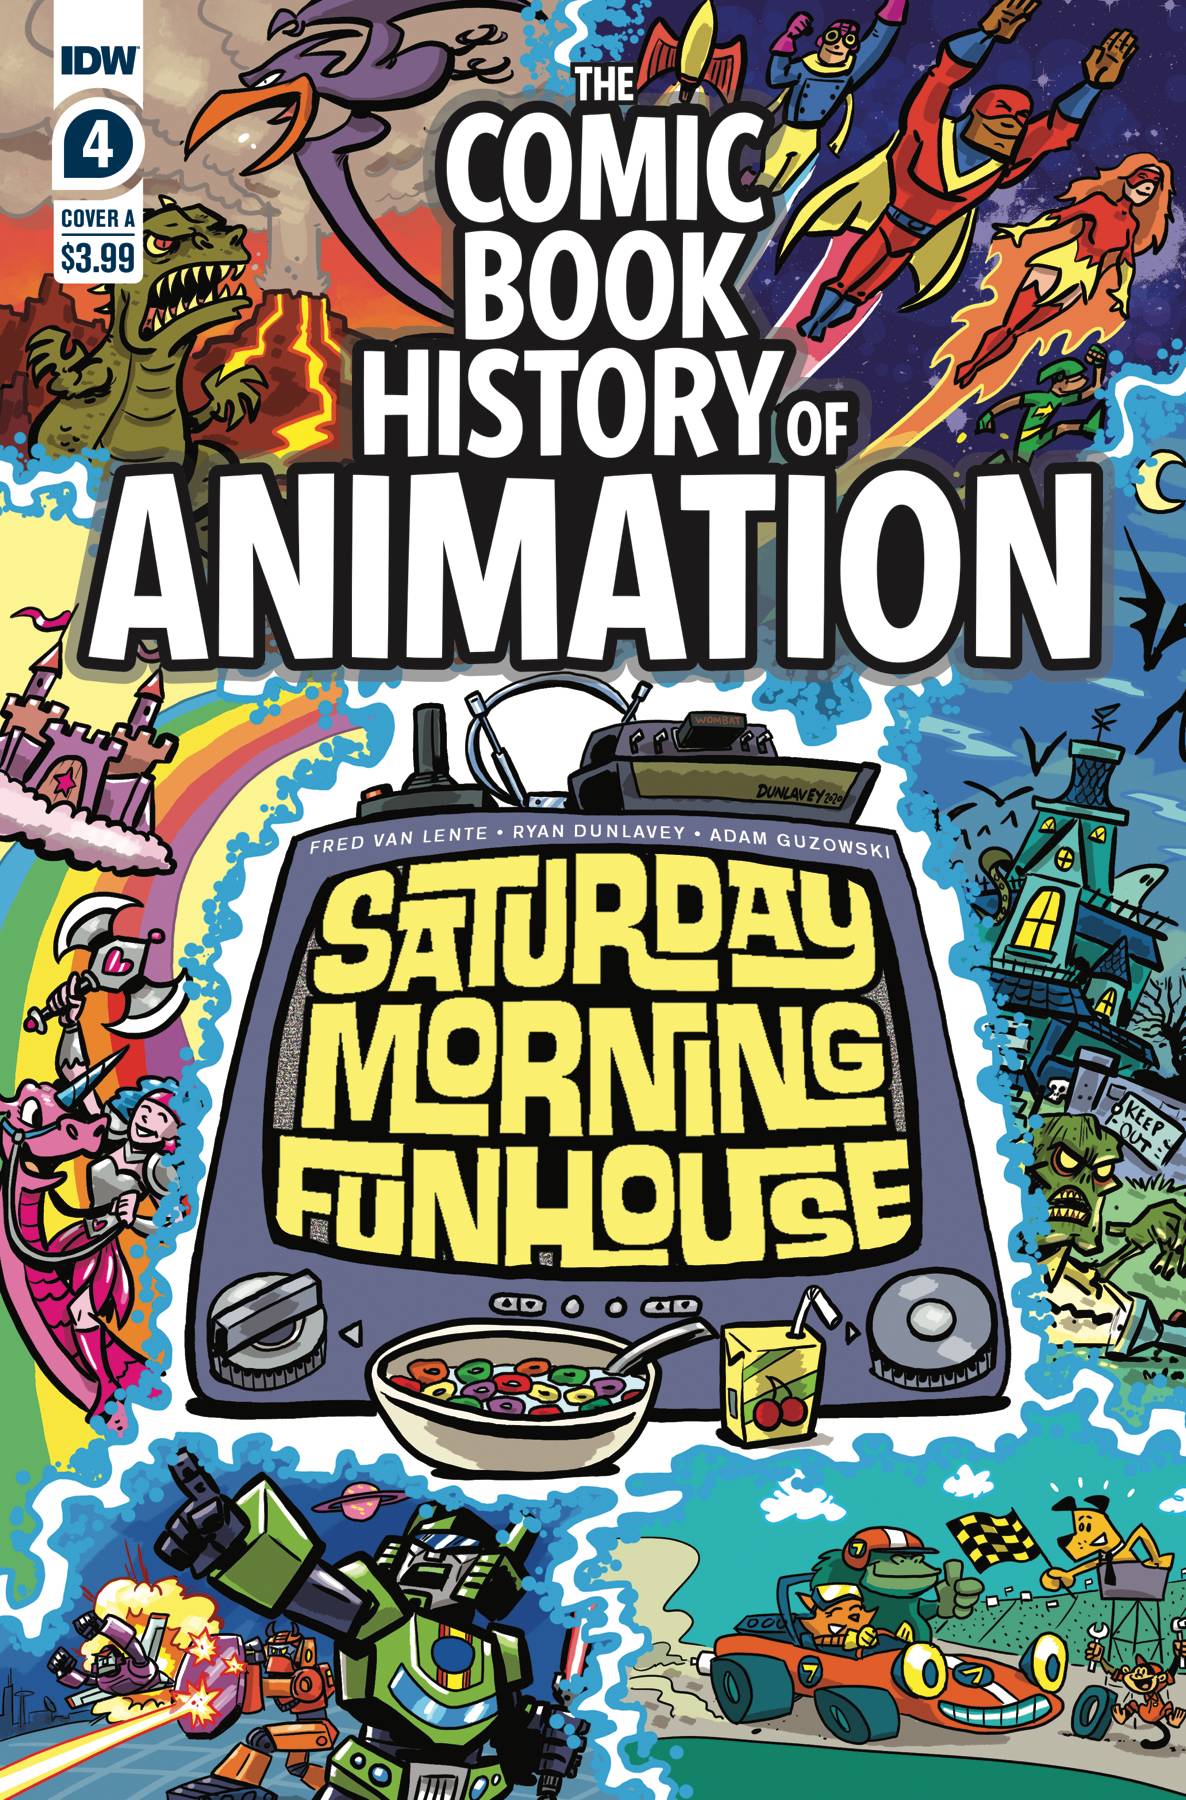 COMIC BOOK HISTORY OF ANIMATION